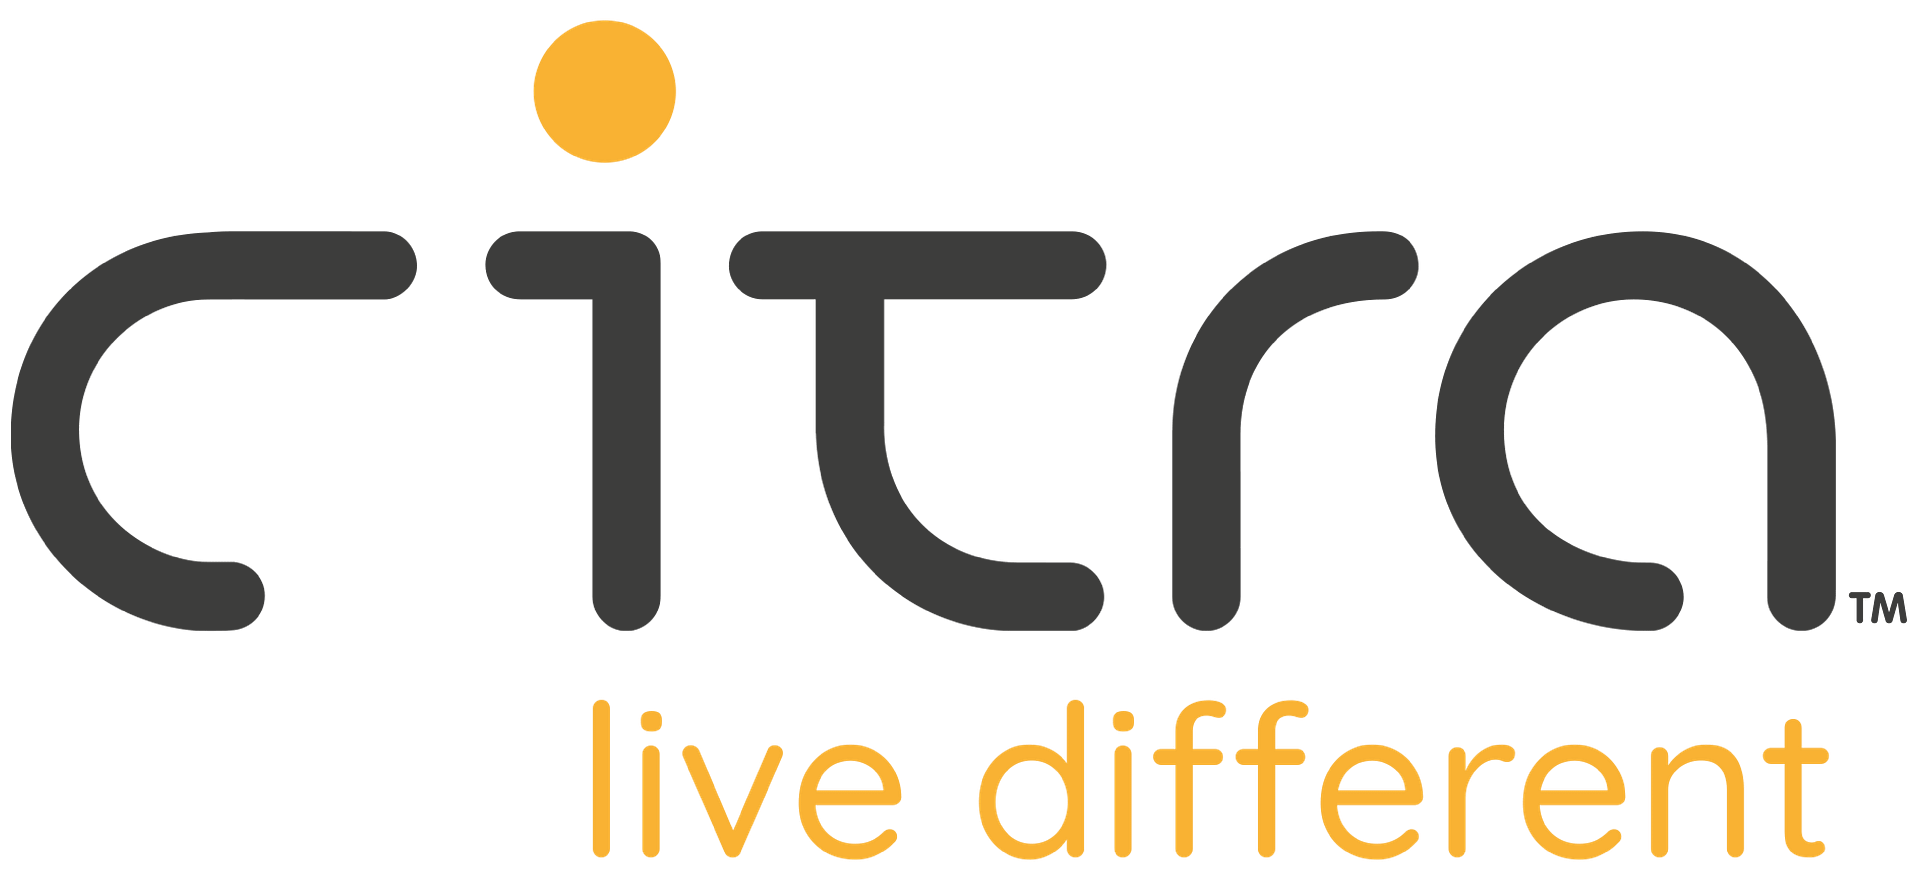 Citra - Live Different